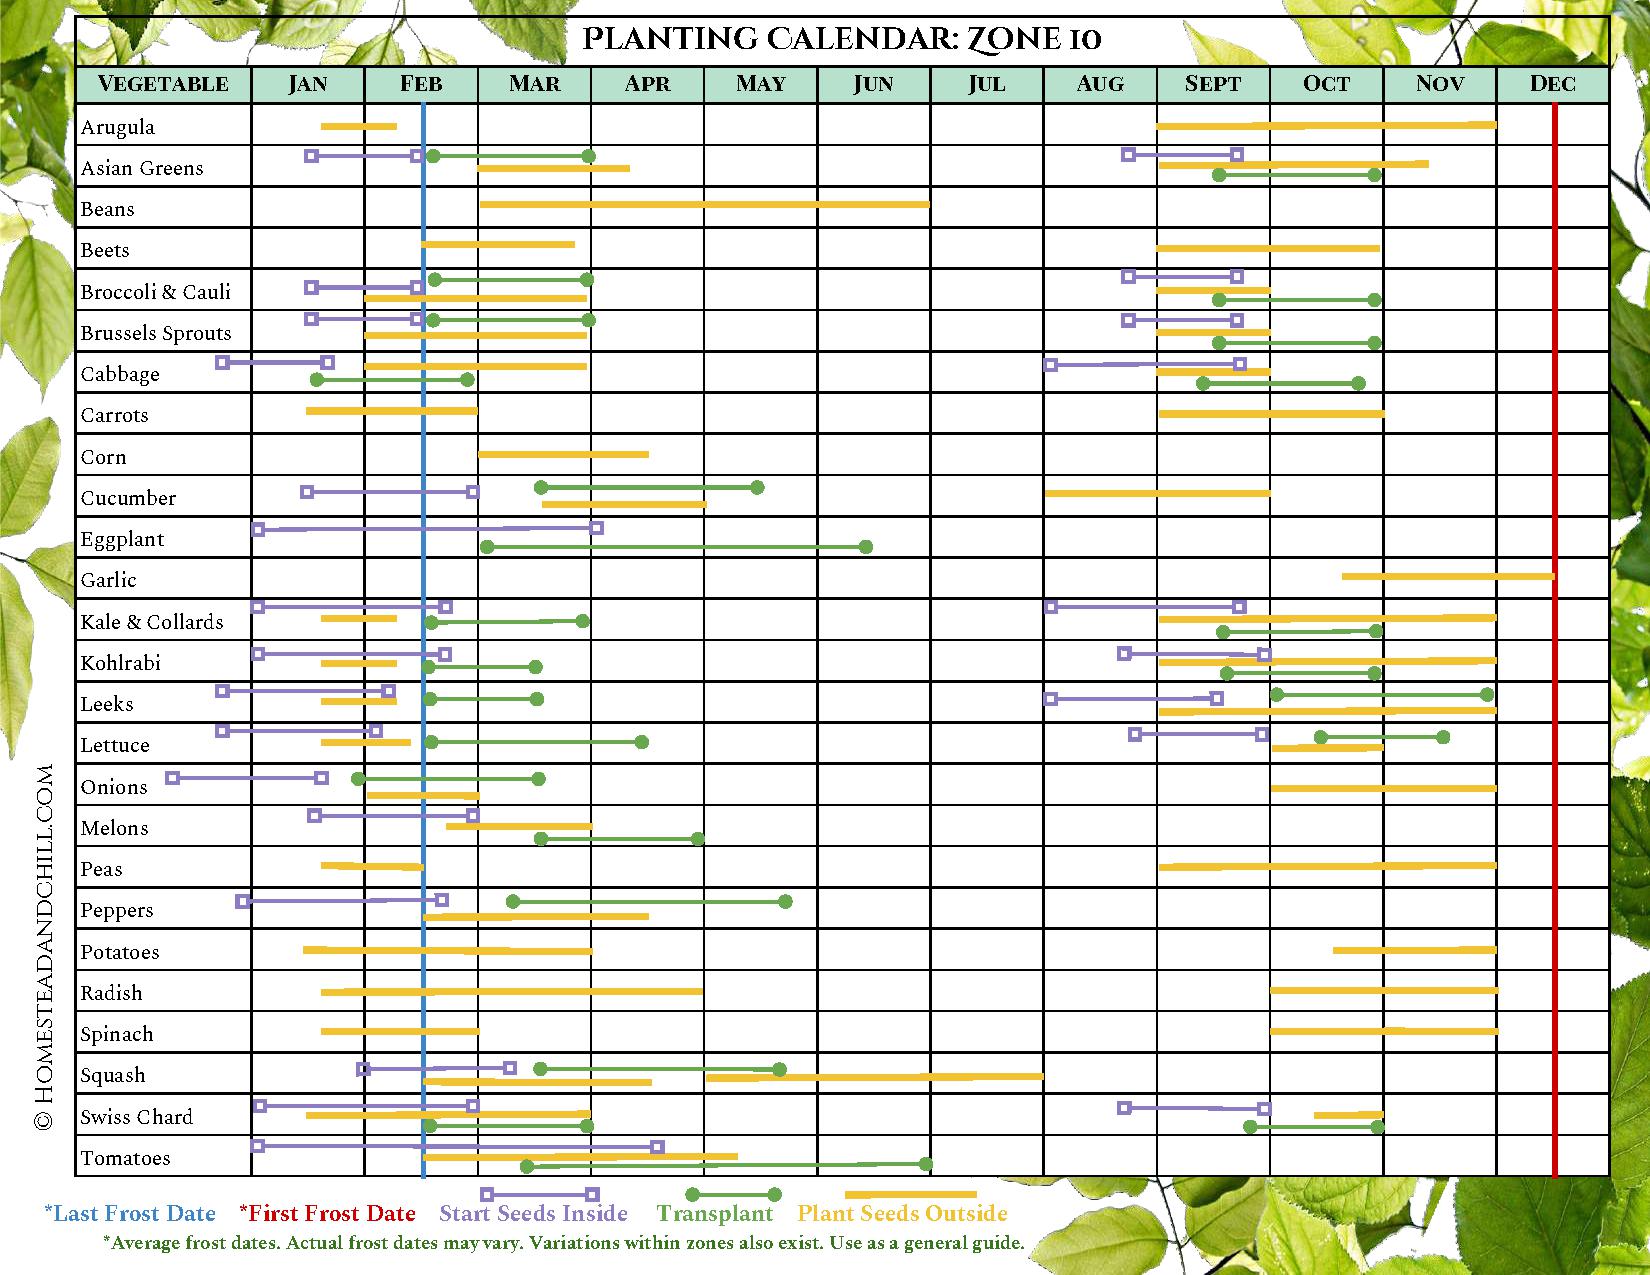 A Homestead and Chill planting calendar for Zone 10 is shown. It depicts when to start seeds inside, transplant outdoors, or plant seeds outside, along with first and last frost dates. 